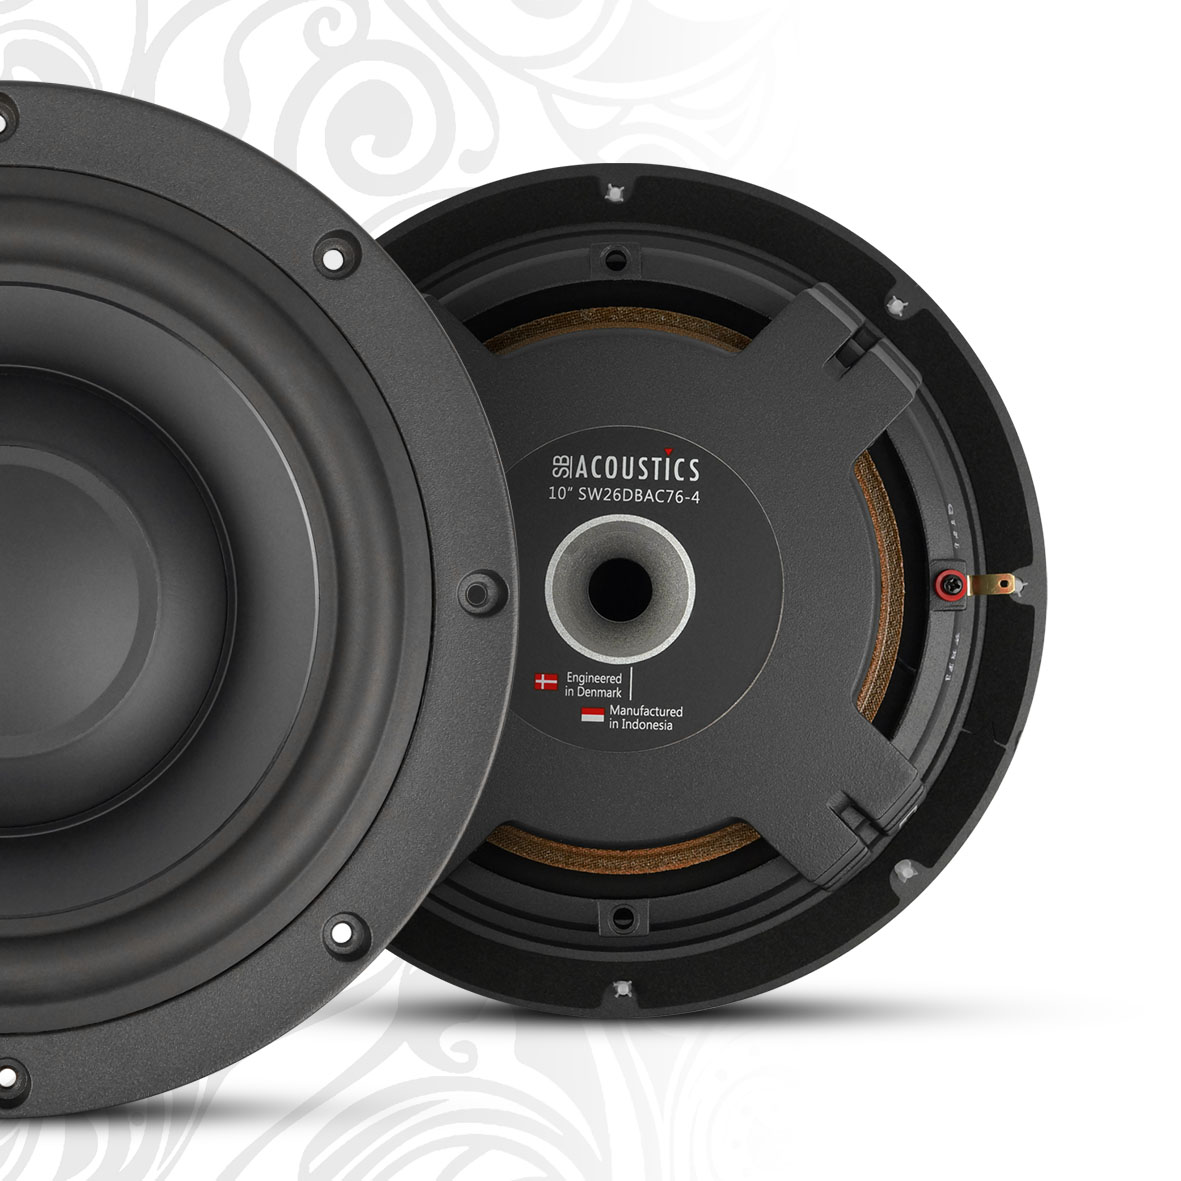 This 10 inch SW26DBAC76-4 review has been published, 
you can find it on the @audioXP_editor  website or visit the link below:
audioxpress.com/article/test-b…

#sbacoustics #subwoofer #shallowsubwoofer #audioreview #speaker #hiend  #audio #highendspeakers #loudspeaker #hiendaudio